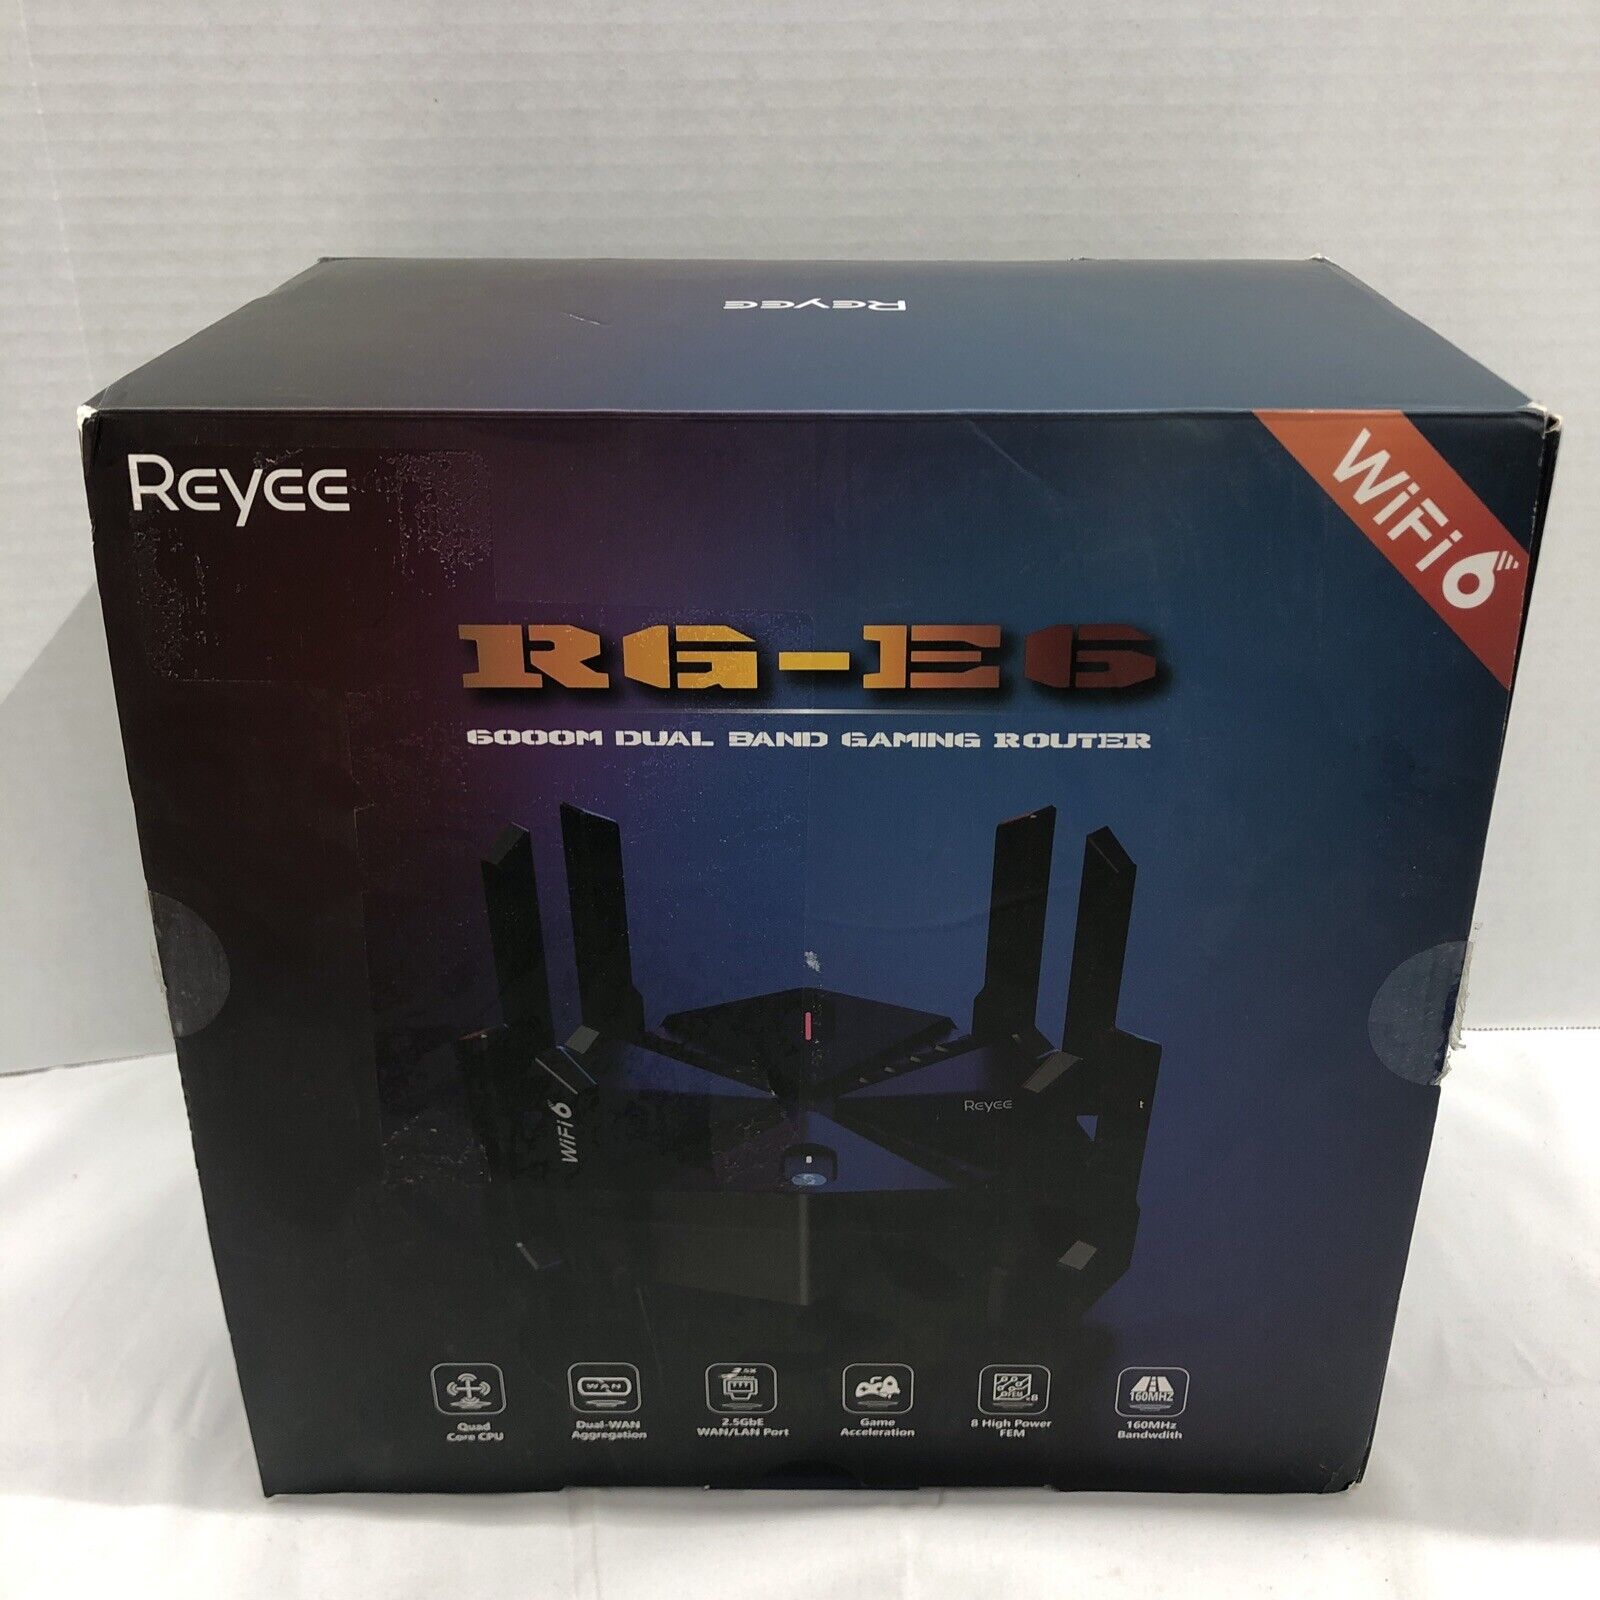 Reyee AX6000 RG-E6 WiFi 6 Router Wireless 8-Stream Gaming Router Black Used